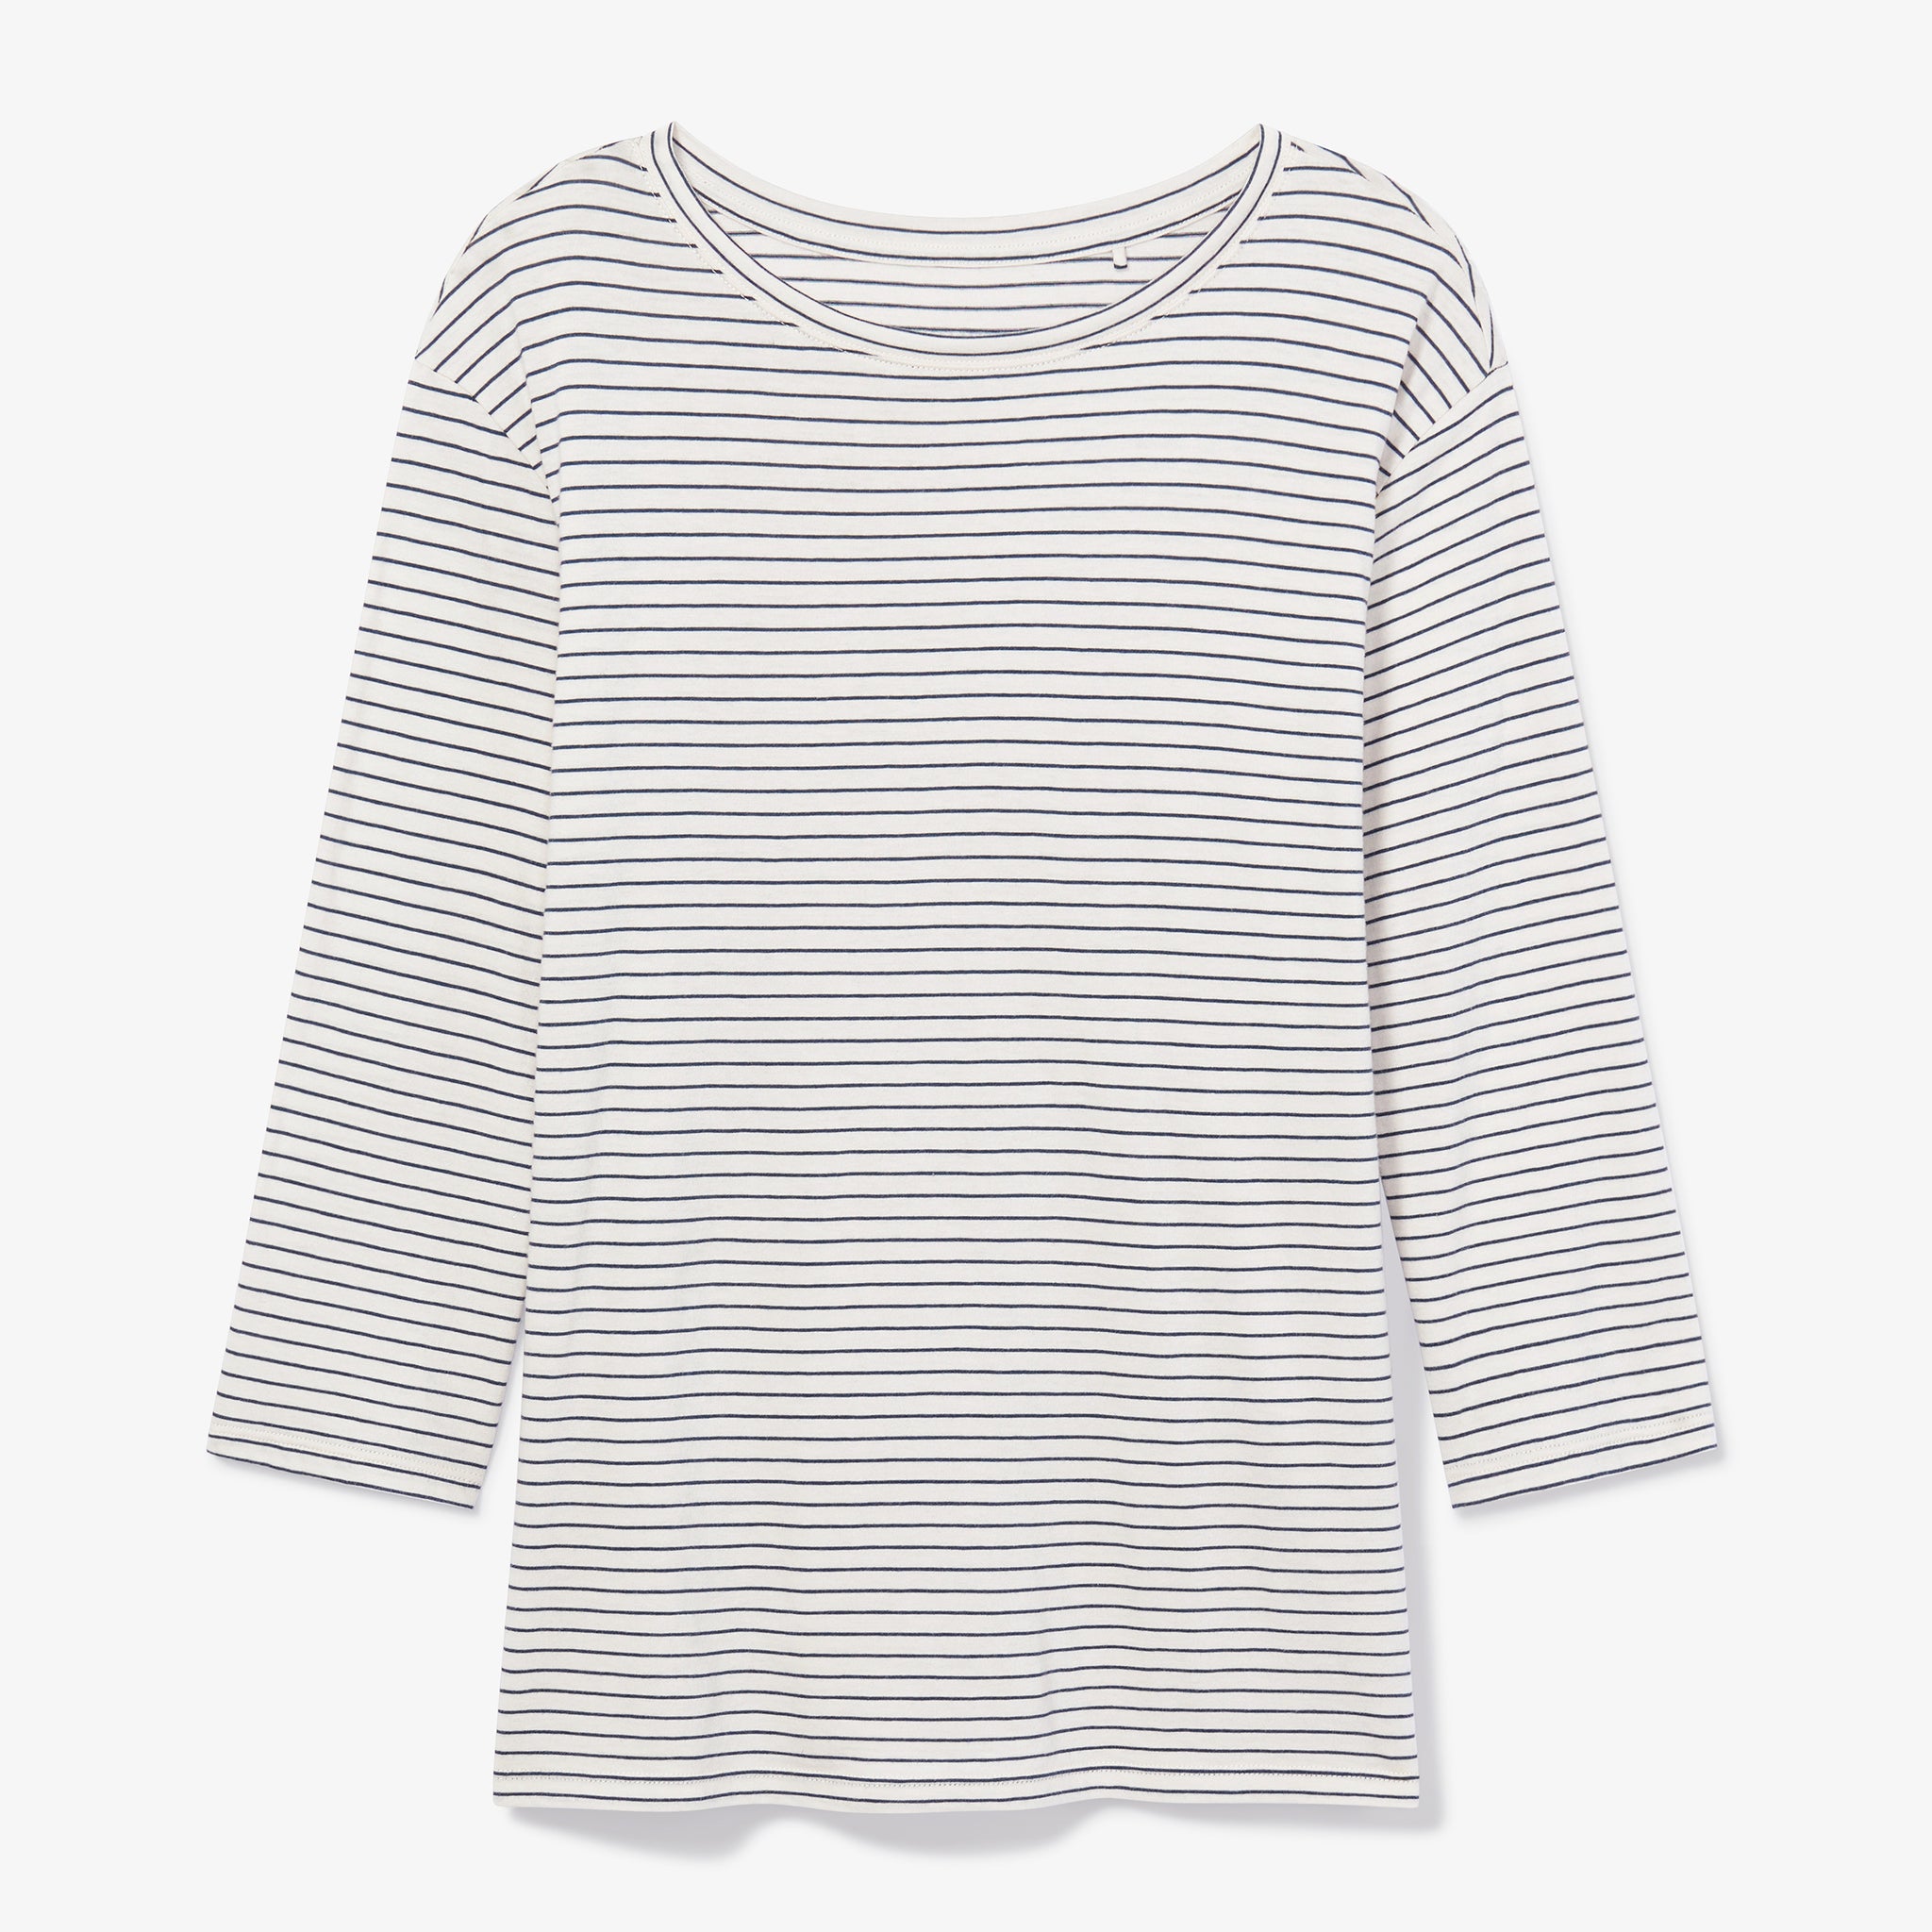 Packshot image of the Owen T-Shirt - Thin Striped Cotton in Ivory / Coastline